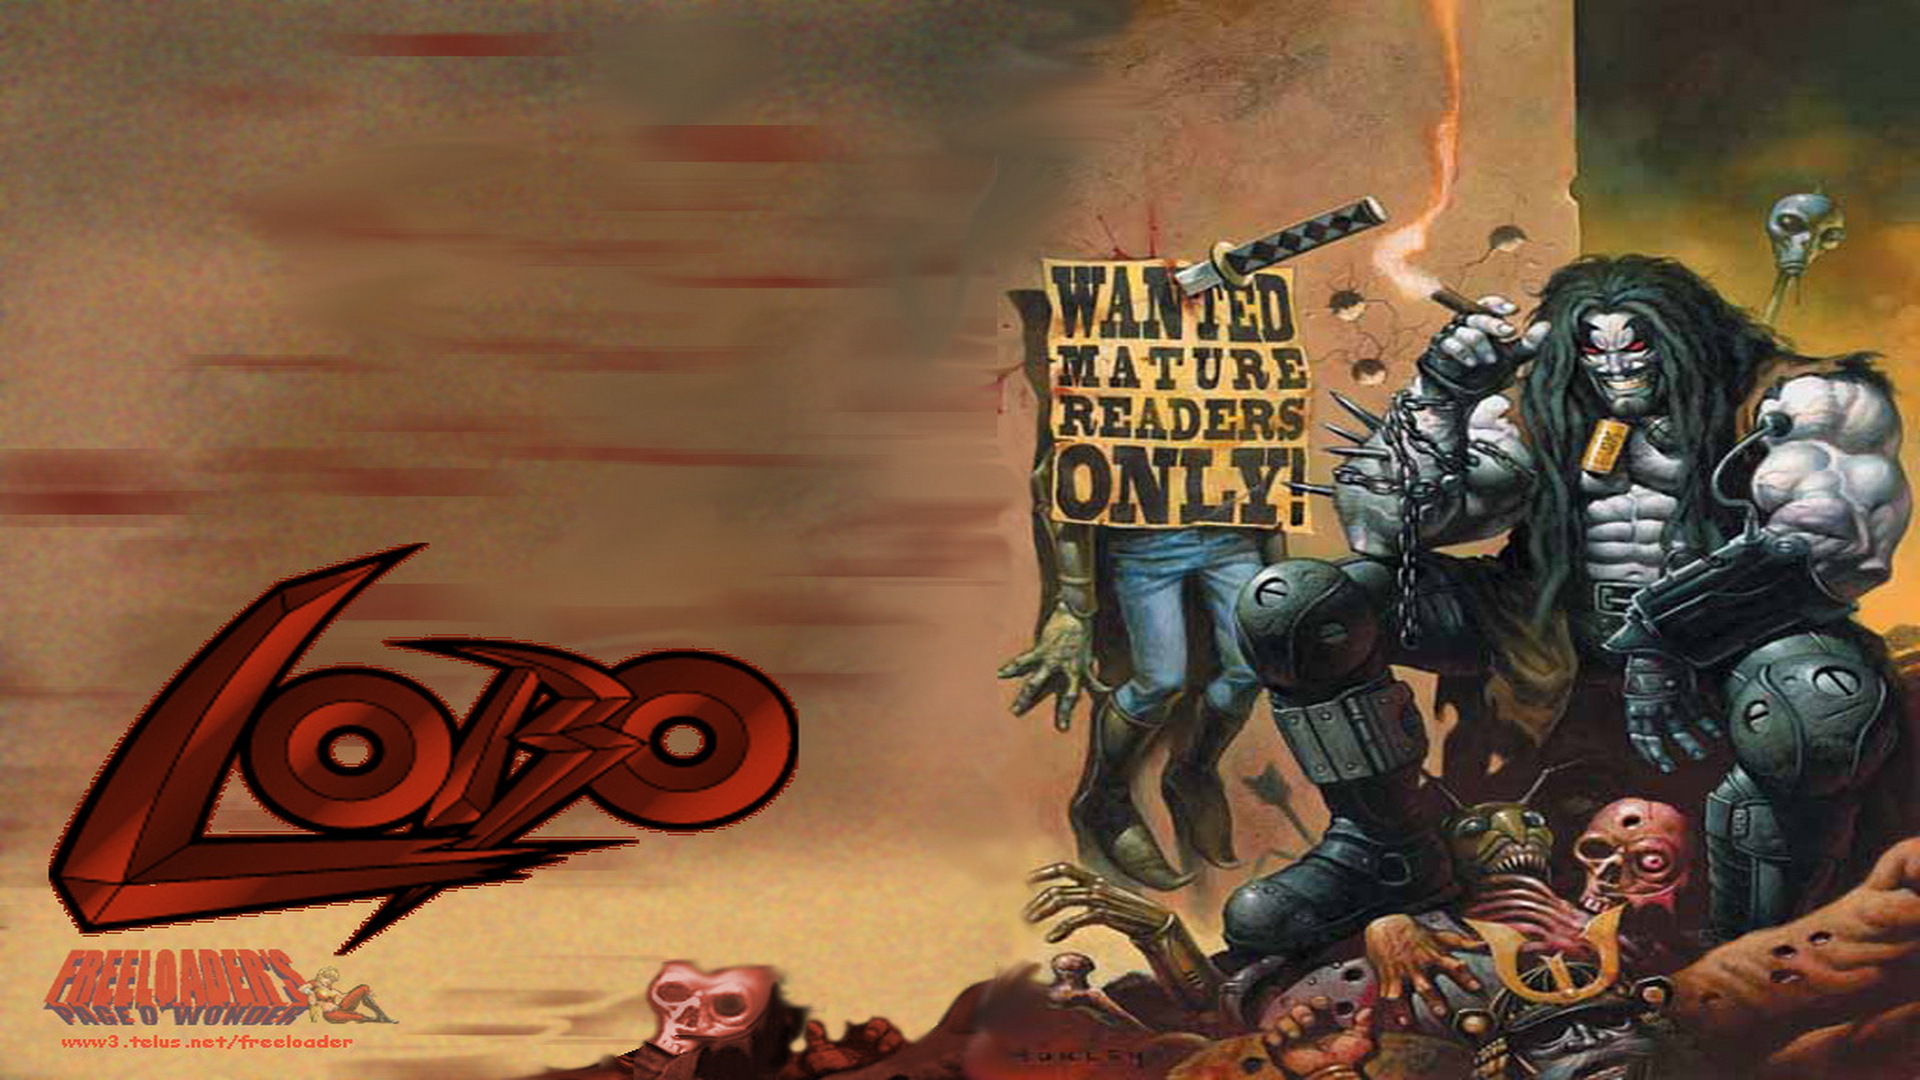 lobo dc wallpaper,action adventure game,pc game,art,fictional character,games